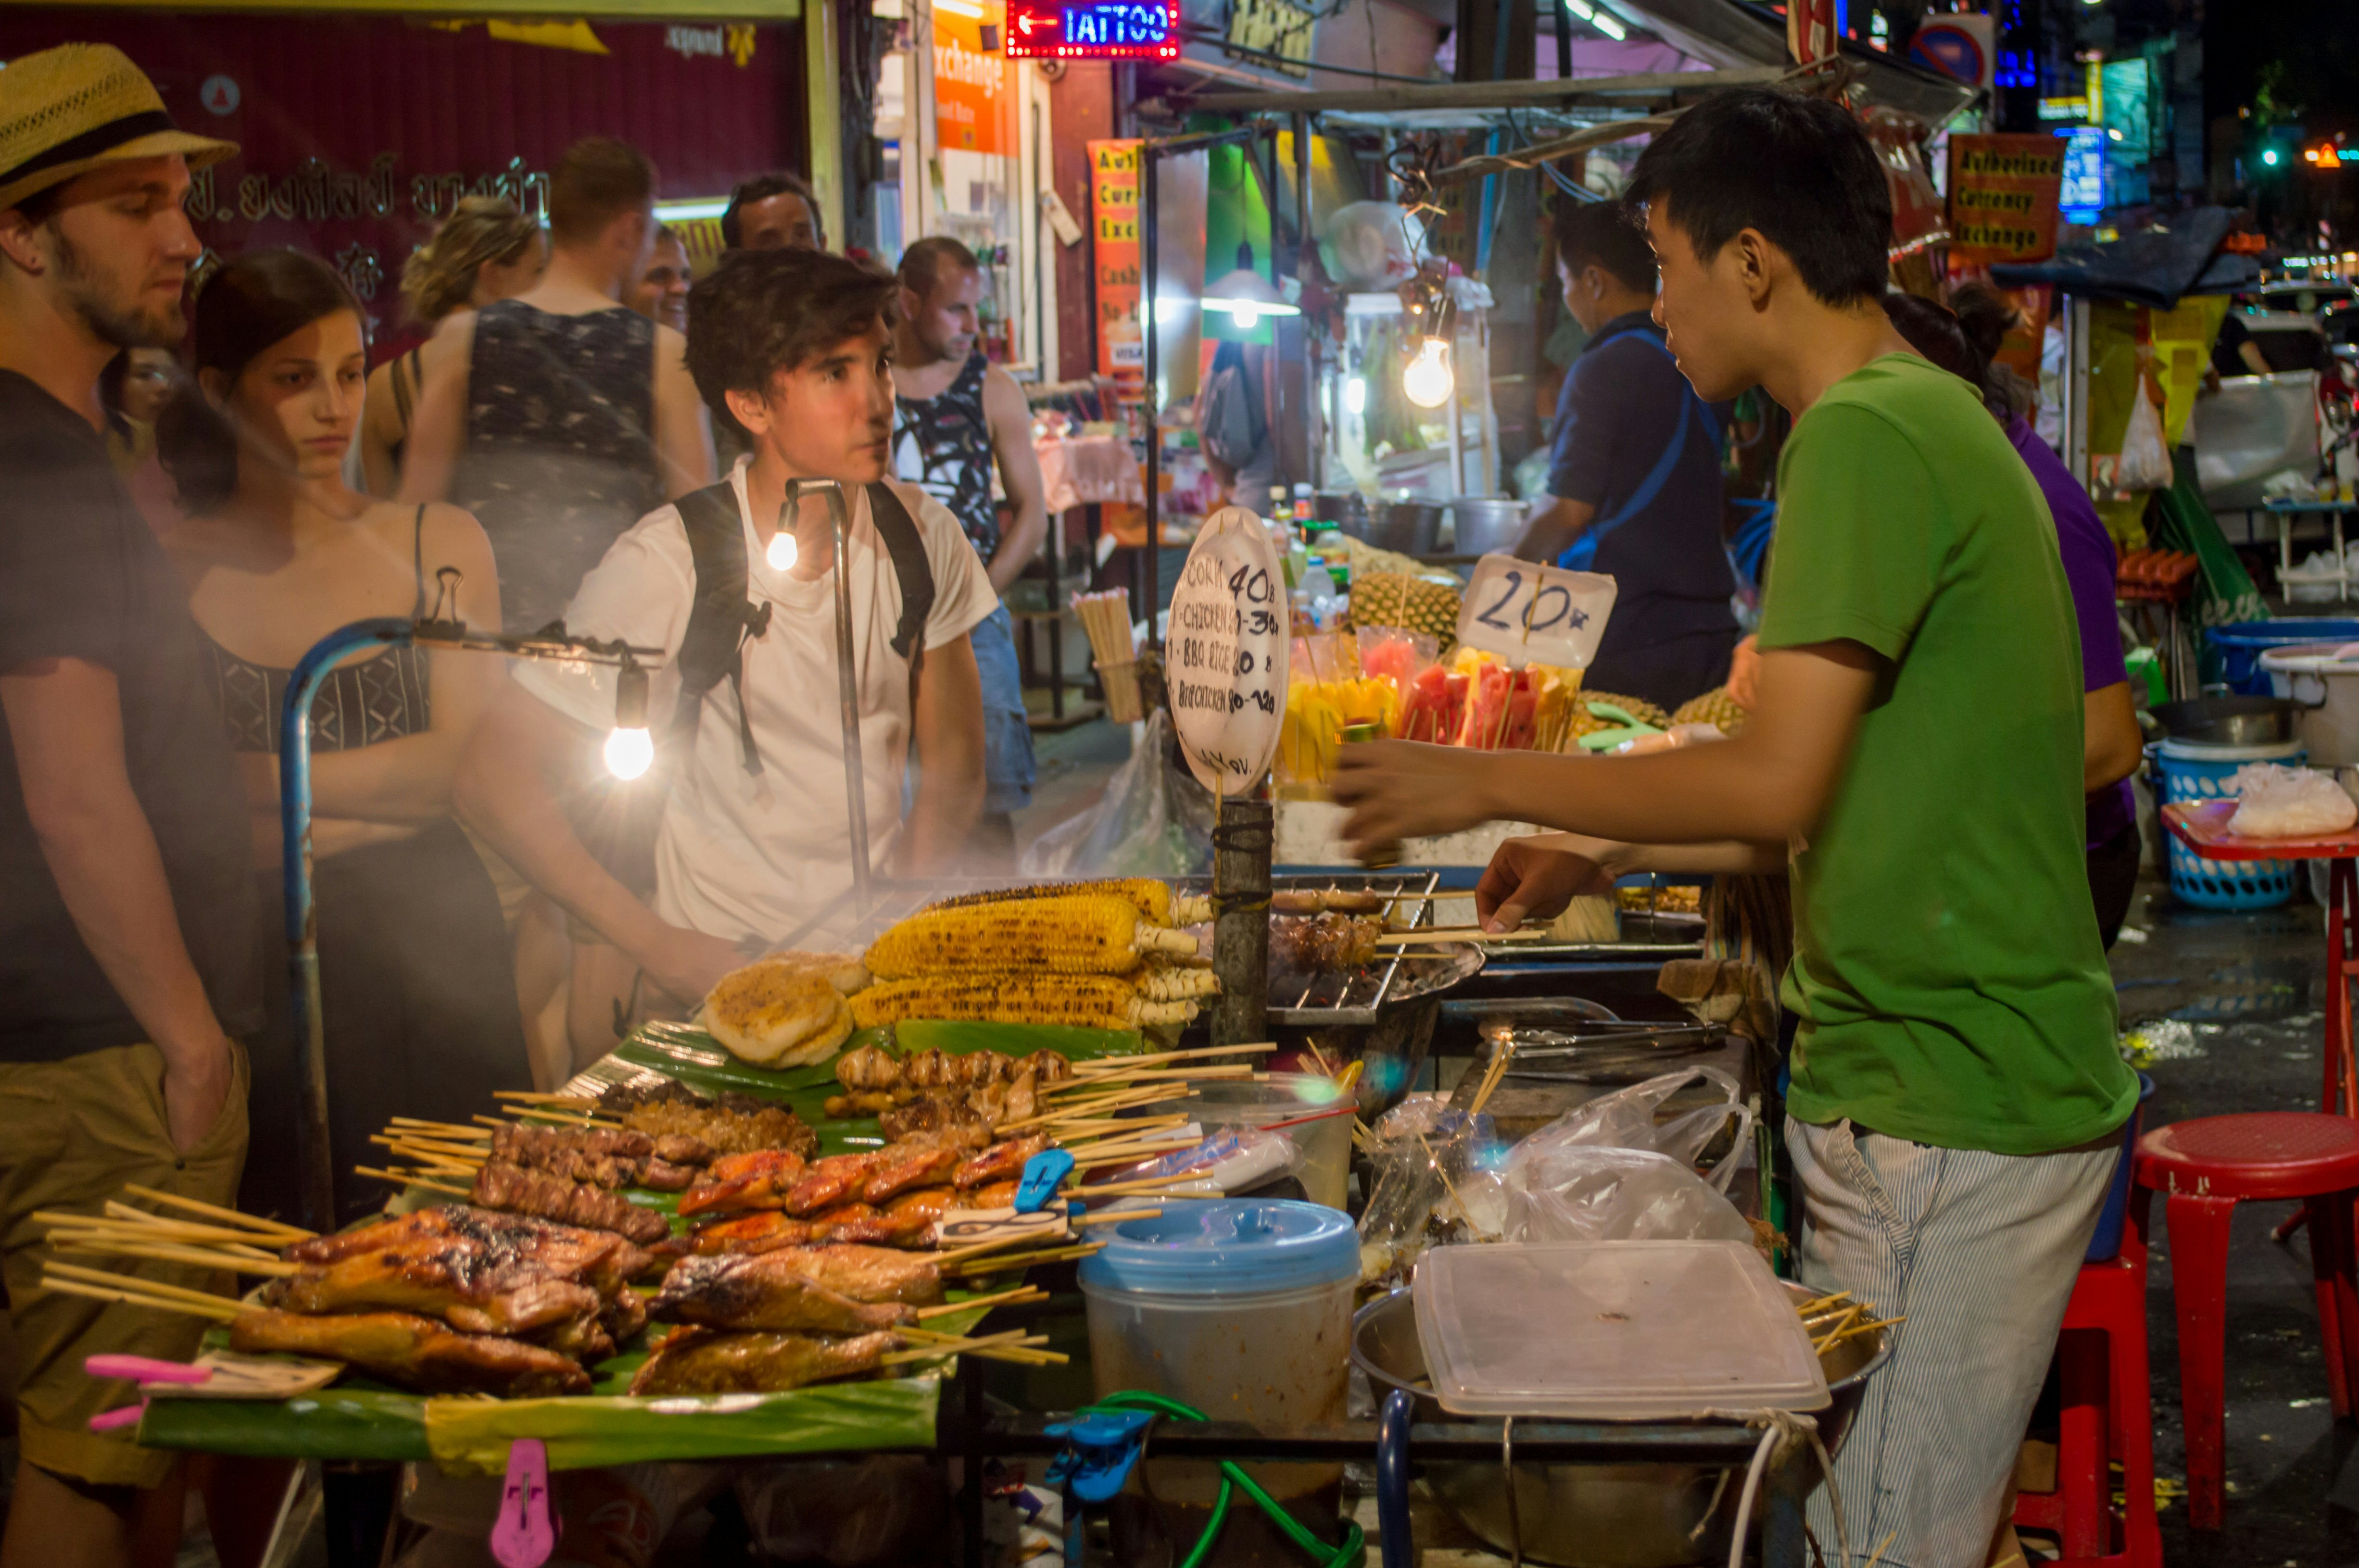 A street food stall on Bangkok's Khao San Road, where a vendor cooks kebabs and vegetables on a grill over an open flame, while a handful of tourists browse the offerings.